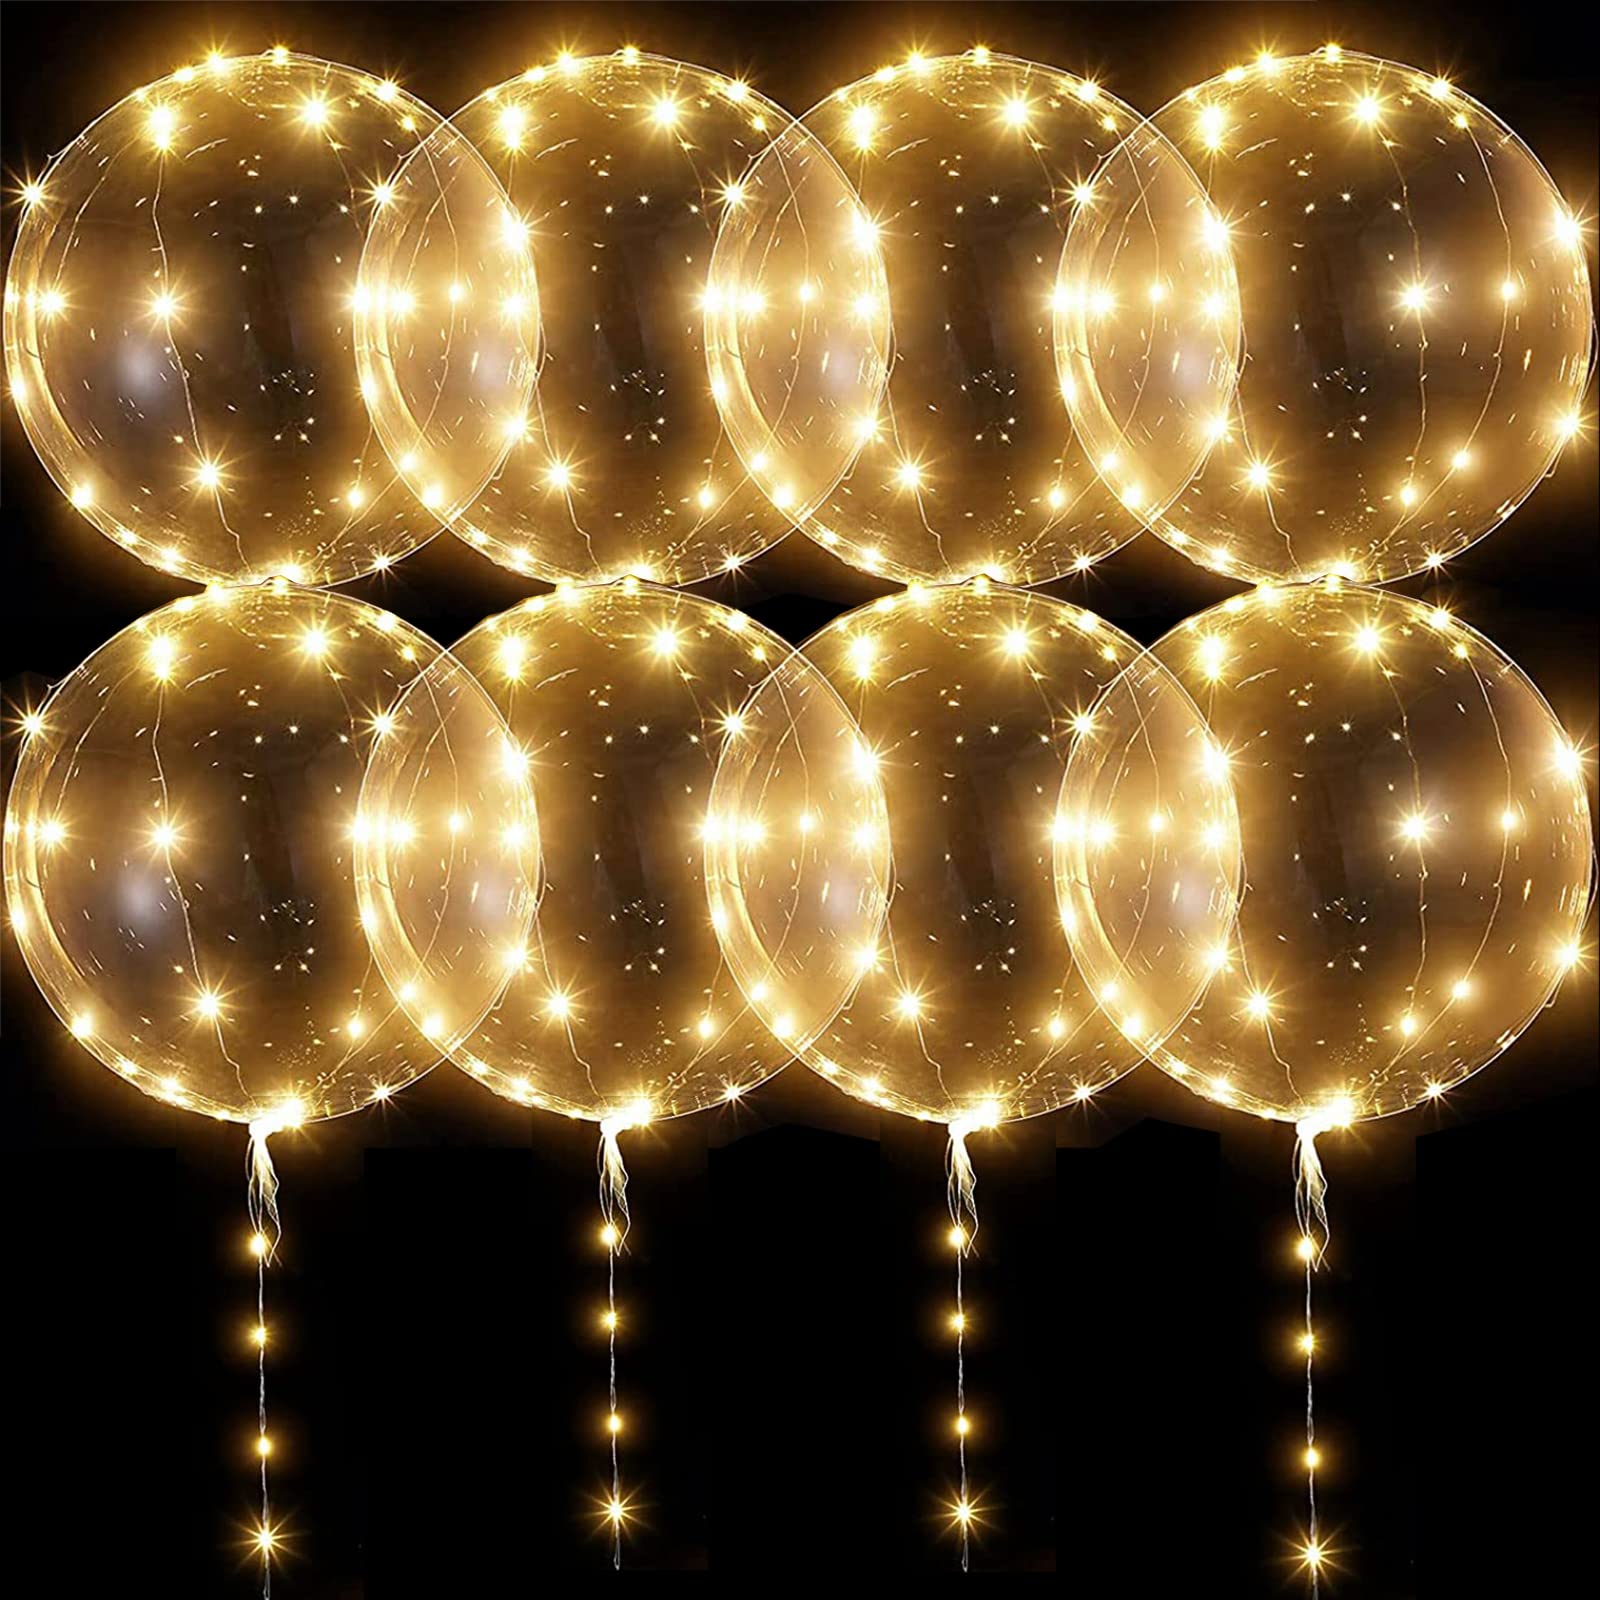 LED Balloons Light Up Balloons - 10 Pack Glow in the Dark Balloons, 20 Inch Clear Bobo Balloons with Lights, Bubble Balloons with String Lights, Helium Glowing Balloons for Party